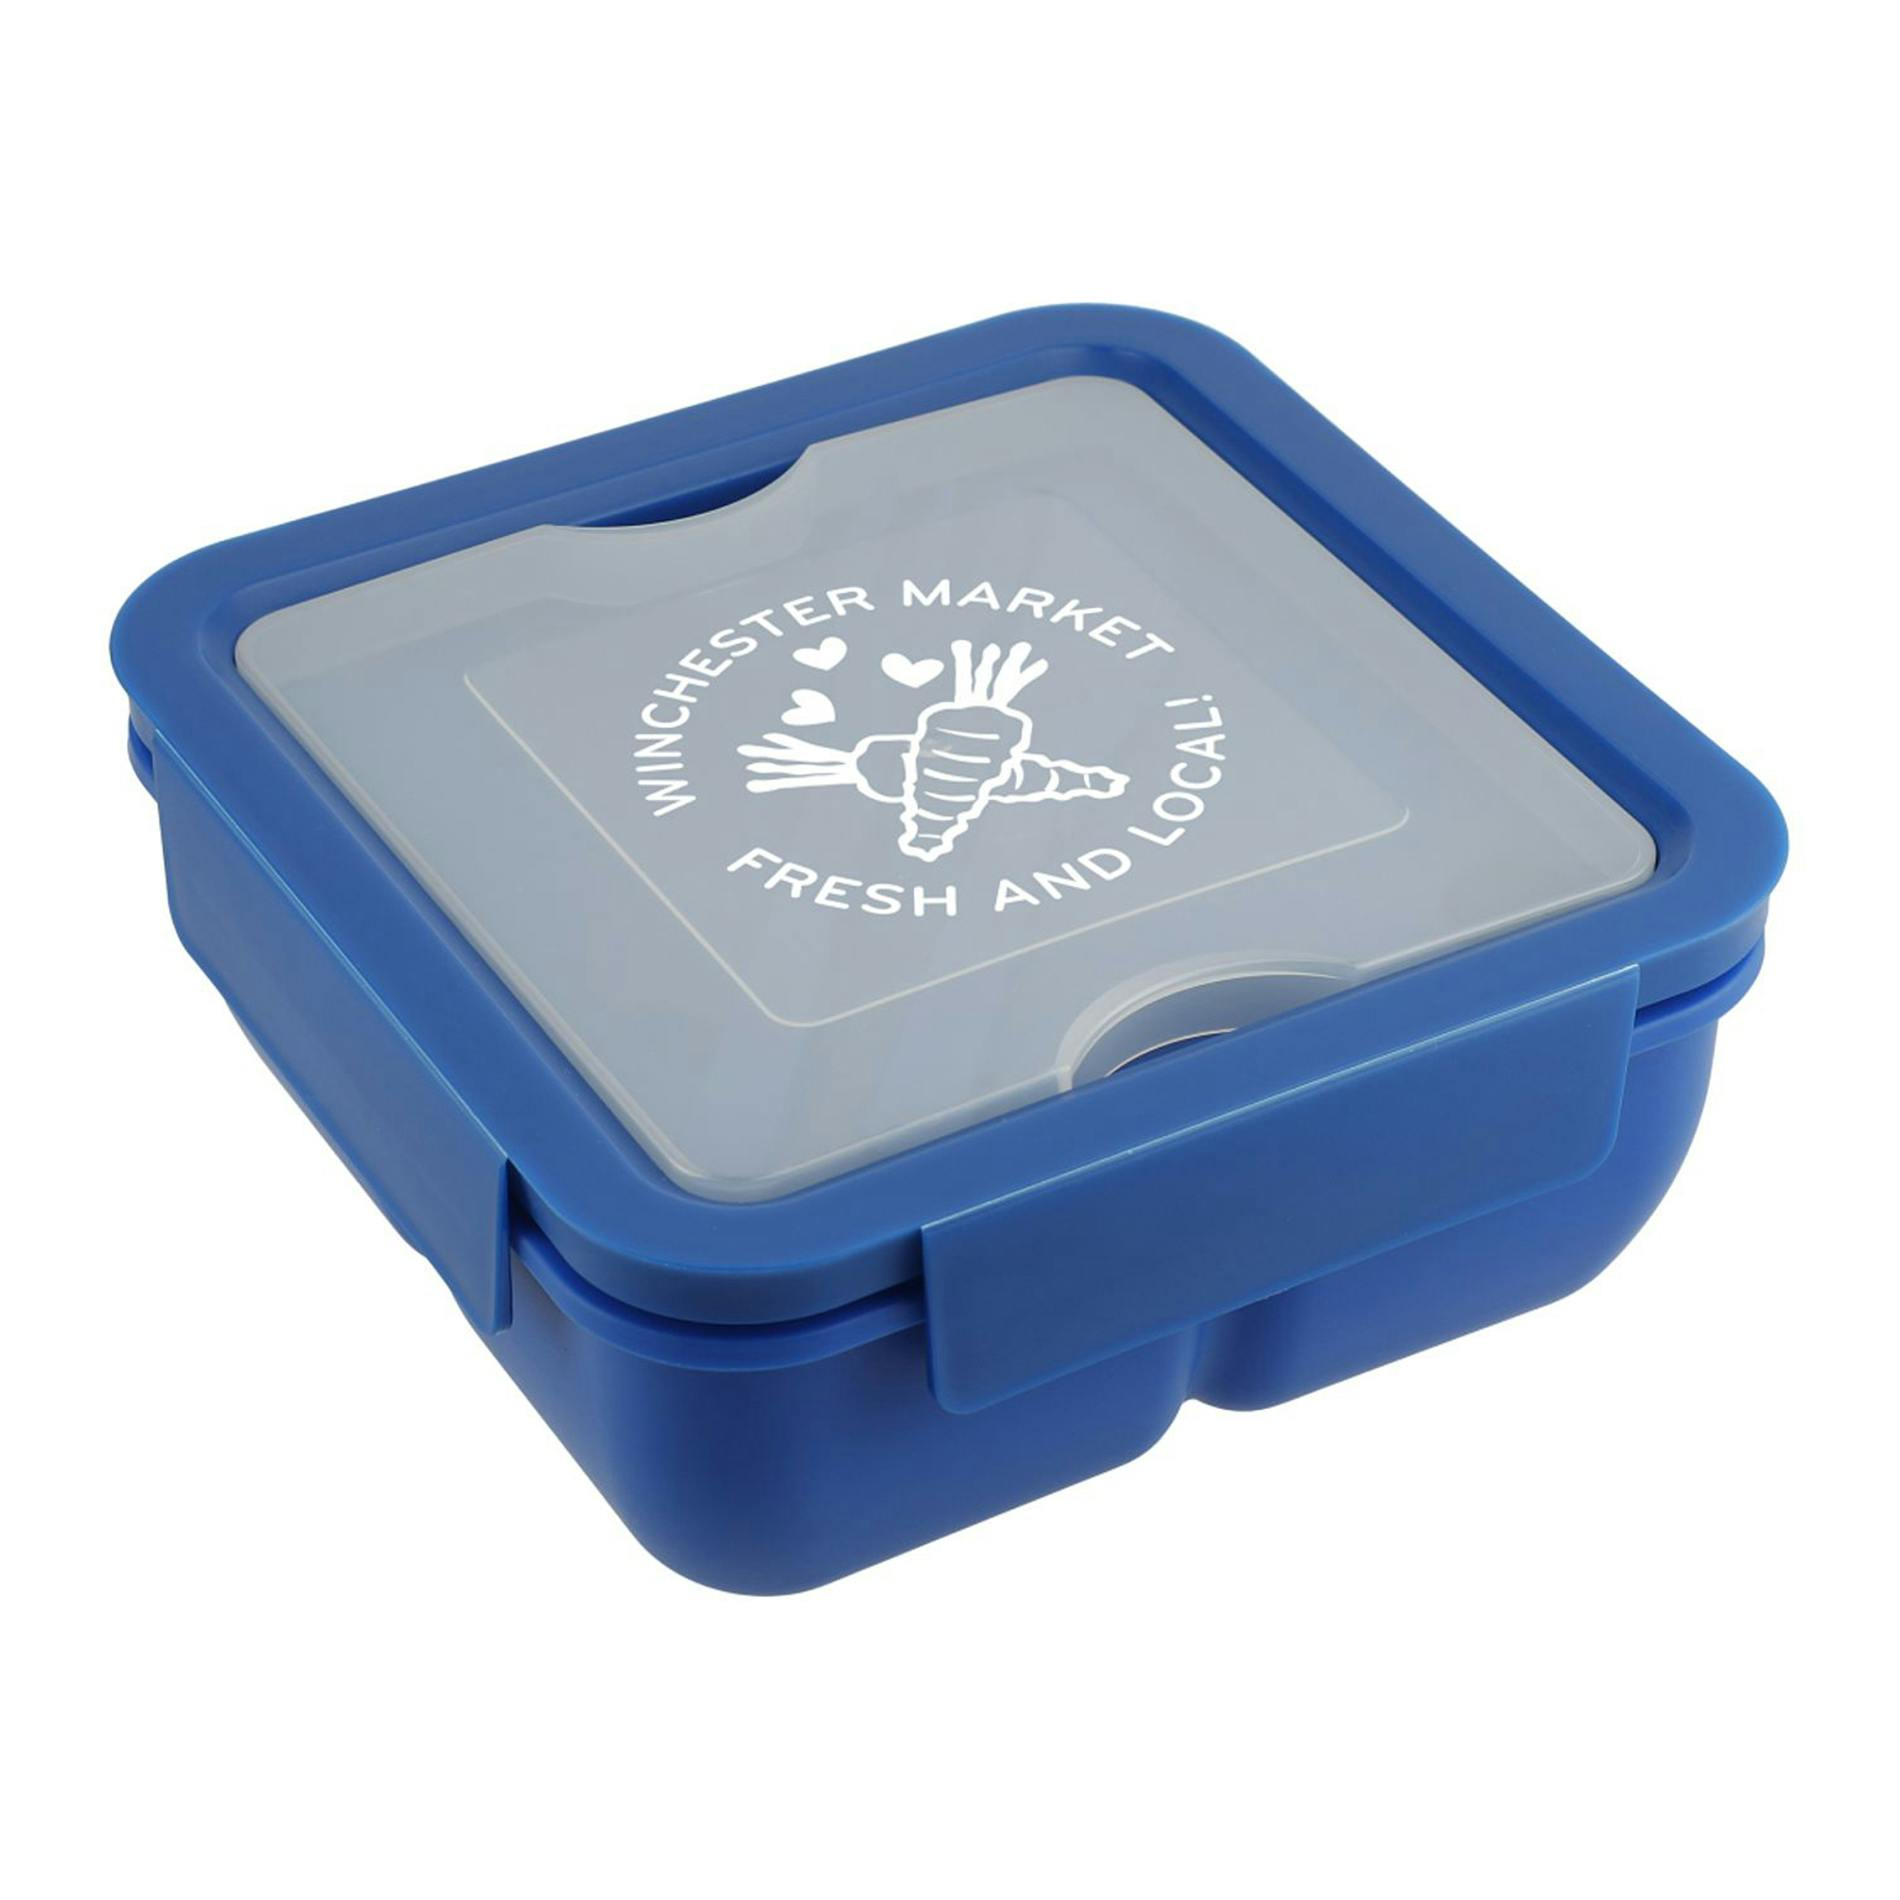 Recycled Plastic Lunch To Go Set - additional Image 5